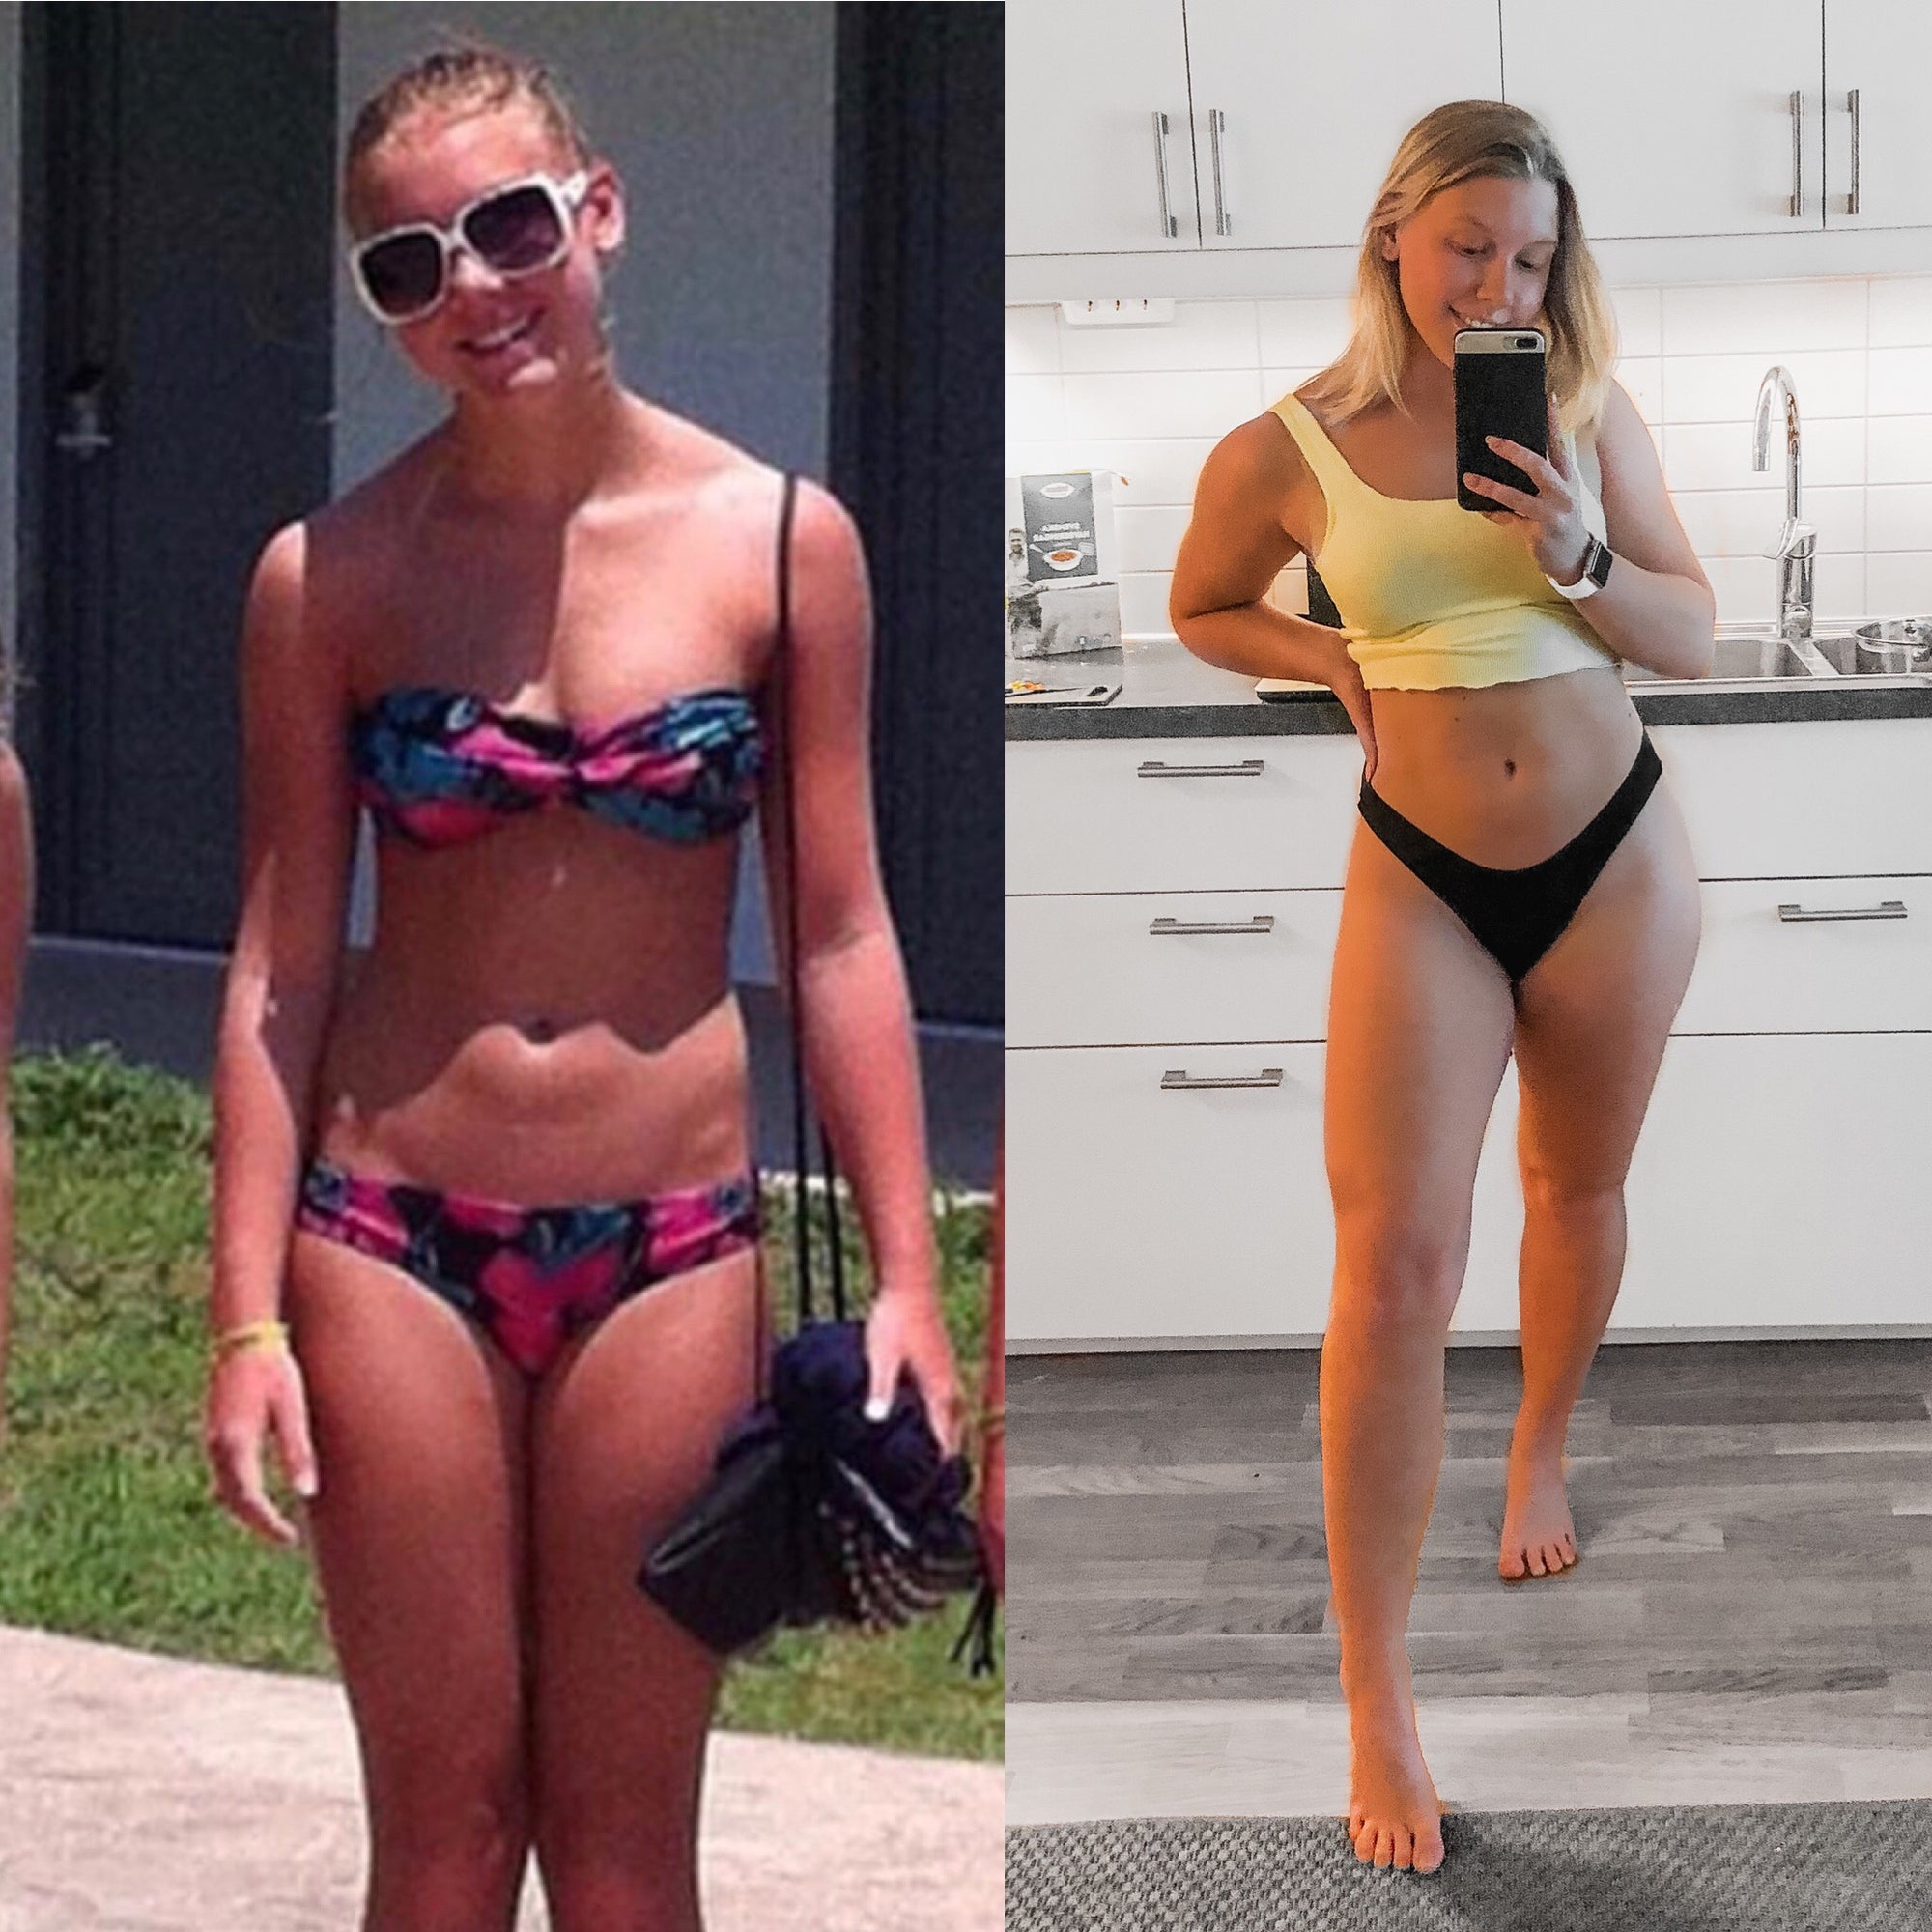 Best Female Gym Transformation Yet. Fitness is a lifelong journey, and every day I kept asking myself: How long after lifting will I see any results? The truth was that the issue to get in shape went pretty fast! My secret was that I made a free workout p